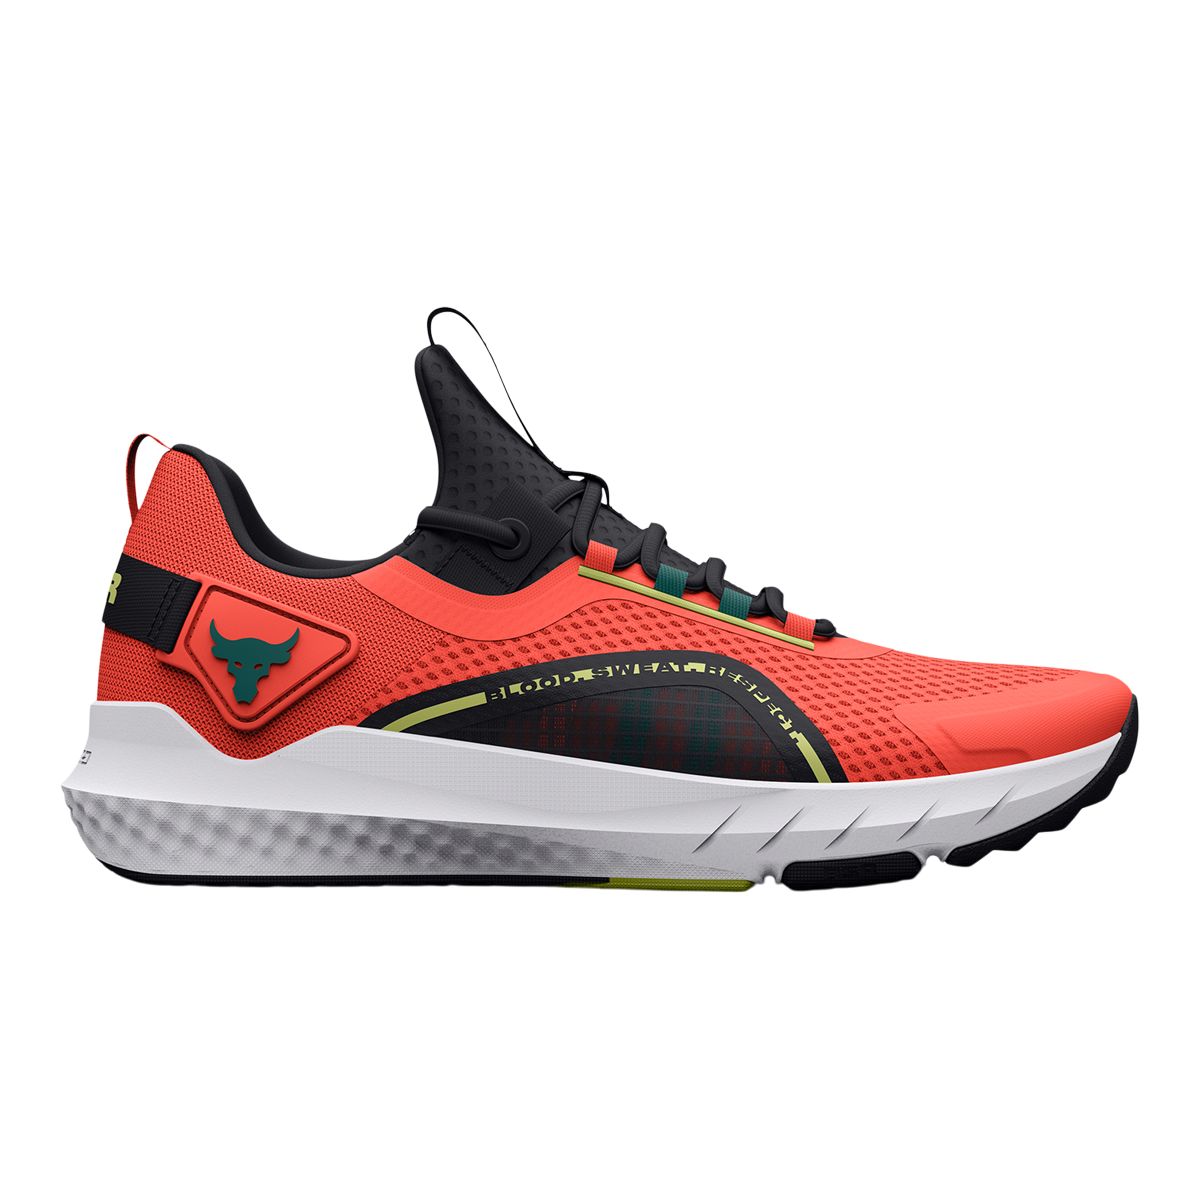 Under Armour Men's Project Rock BSR 3 Training Shoes